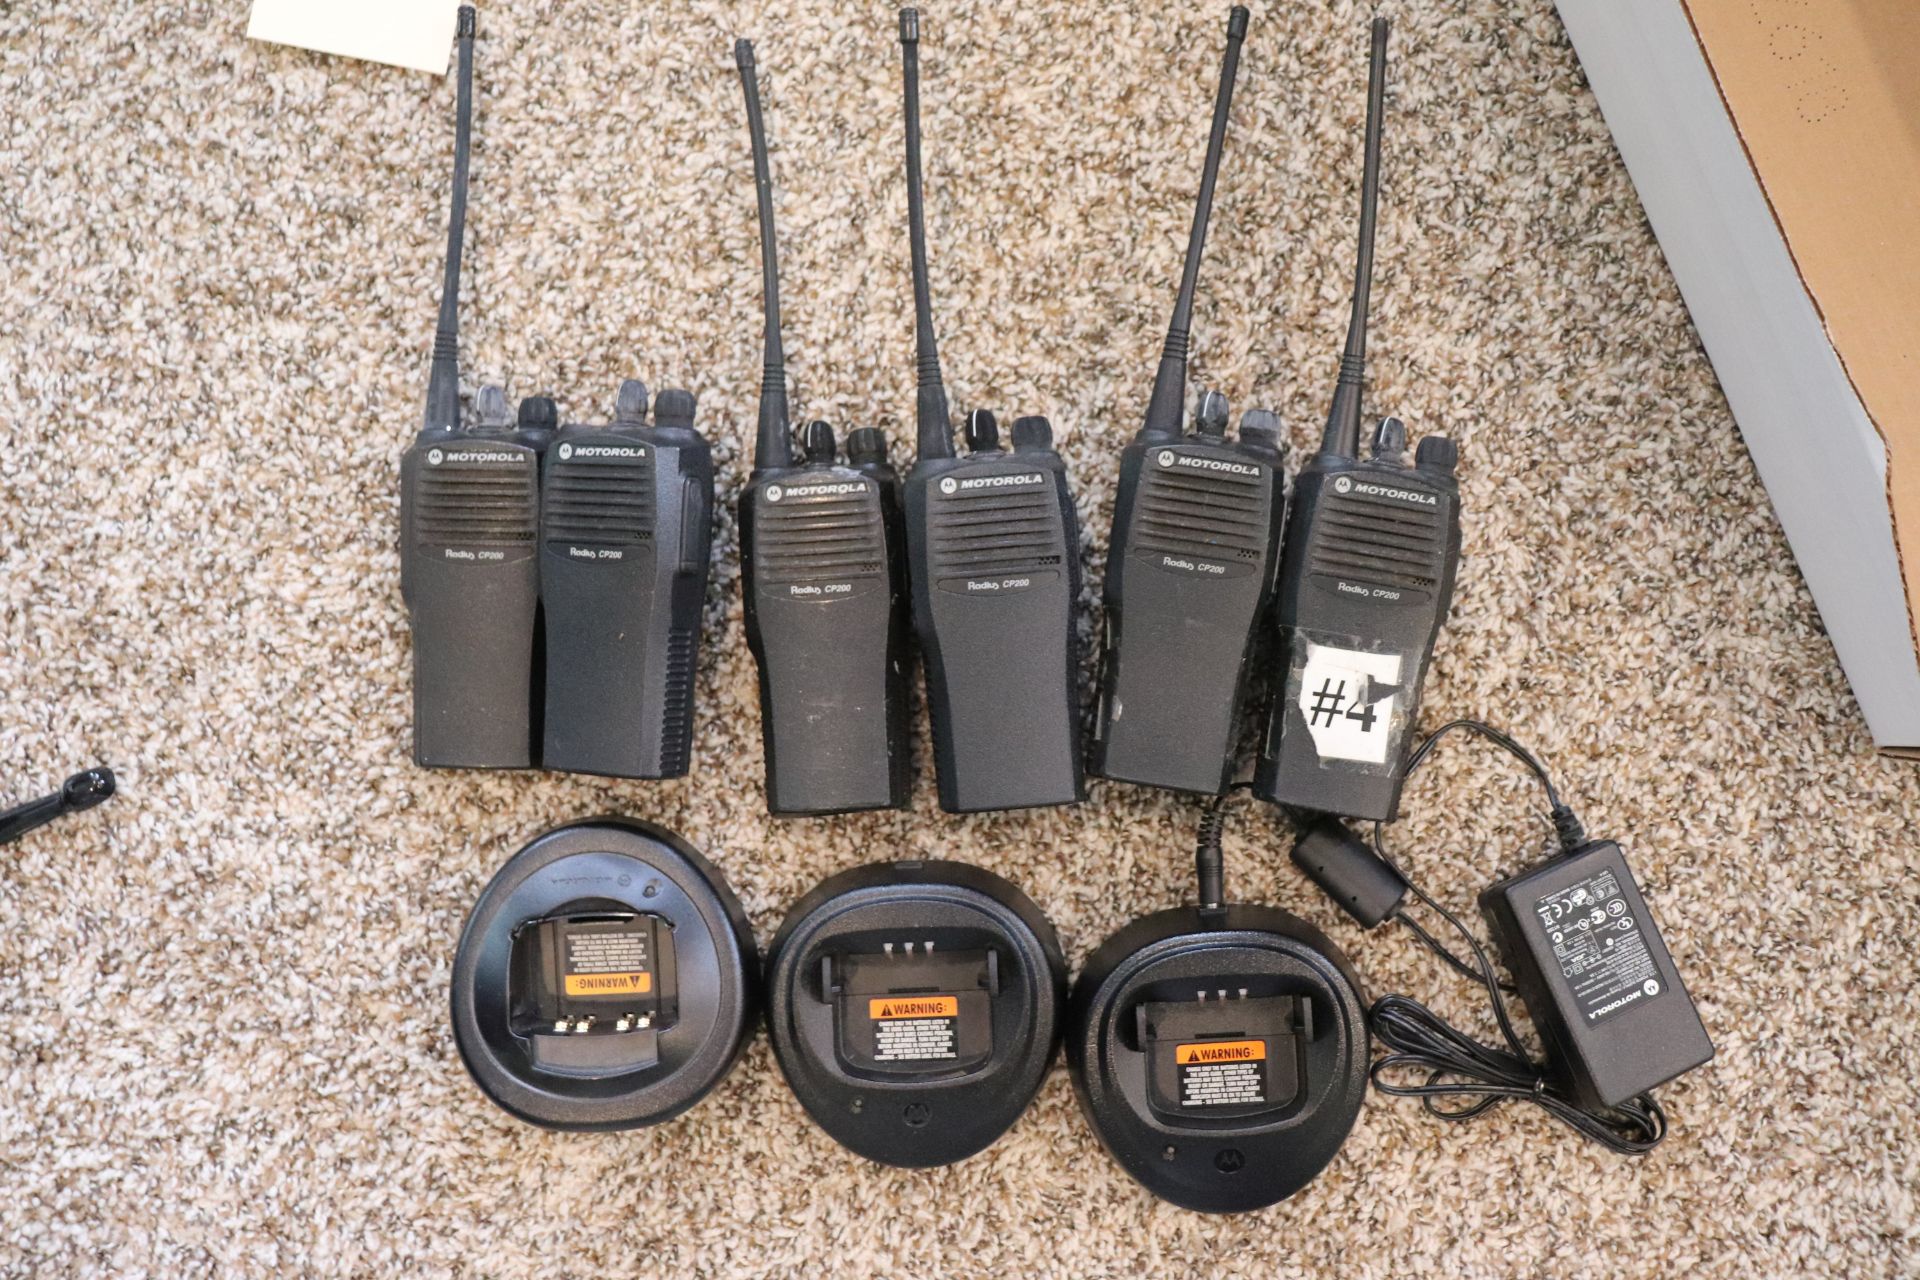 Box lot of six Motorola Two-Way Radios, model Radius CP200, comes with three charging stands